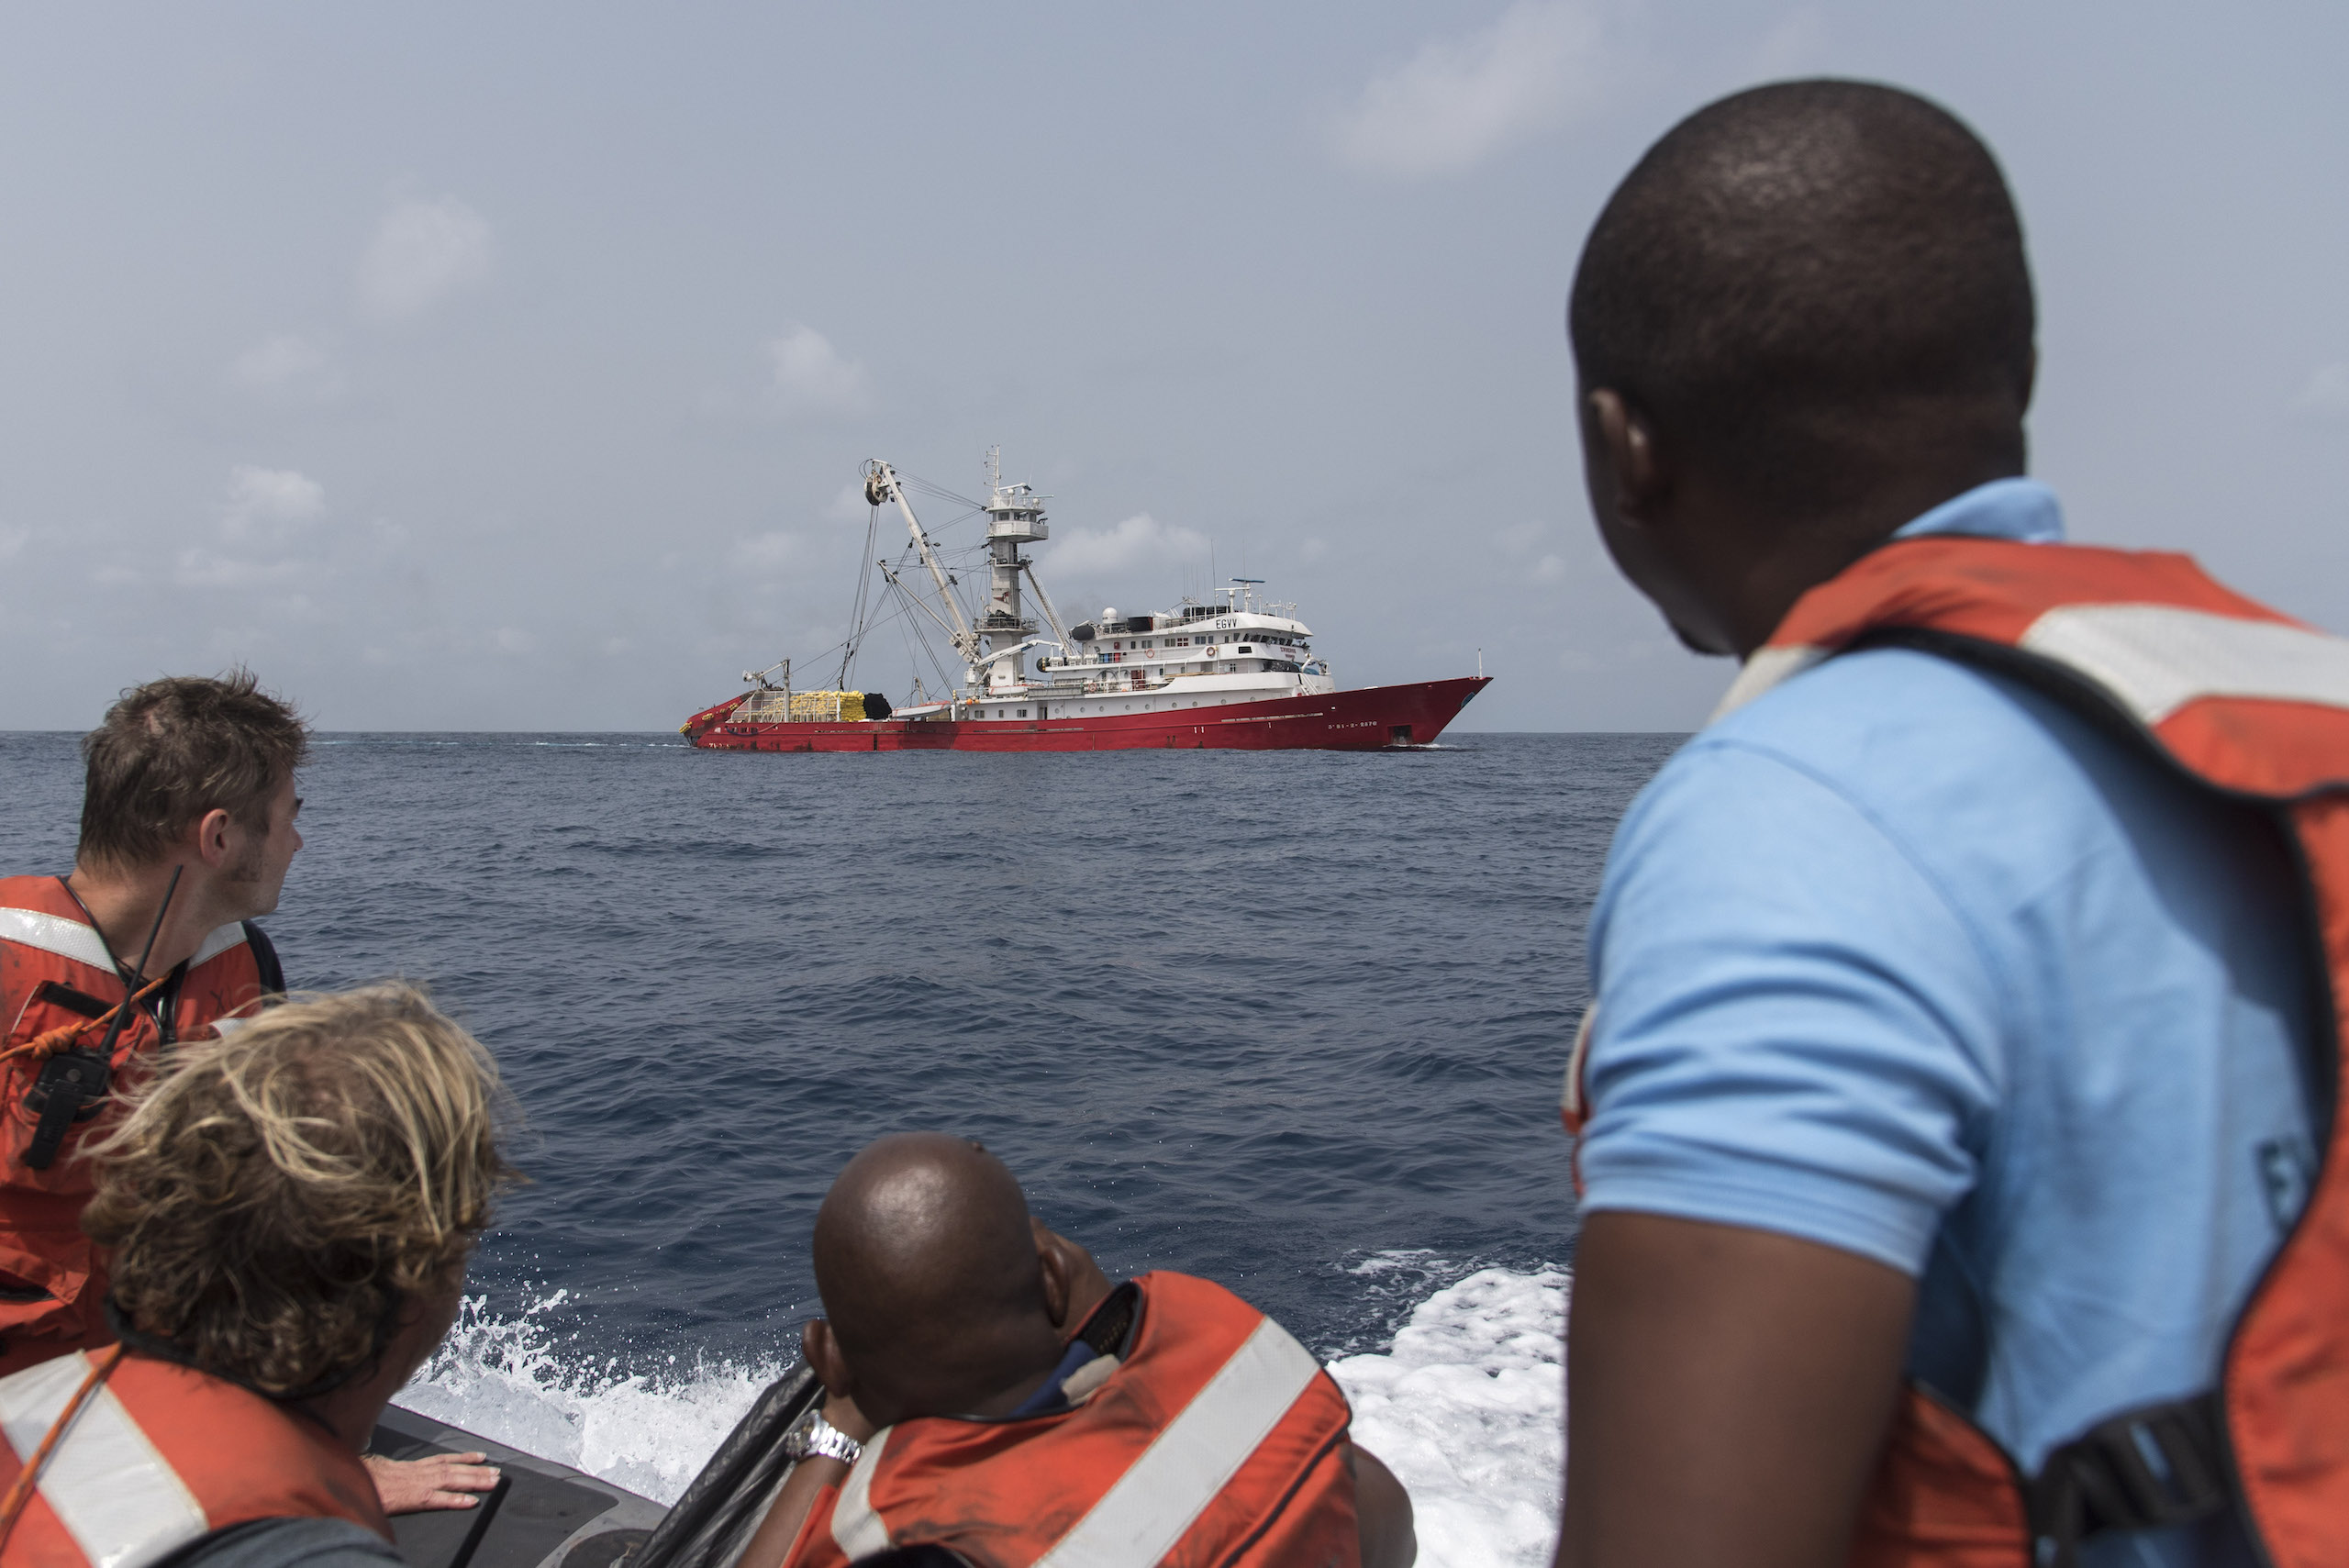 <p>Fishery inspectors approach a Spanish tuna boat in Sierra Leonean waters. The Port State Measures Agreement aims to deter boats engaged in illegal fishing by blocking their entry to ports around the world. (Image © Pierre Gleizes / Greenpeace)</p>